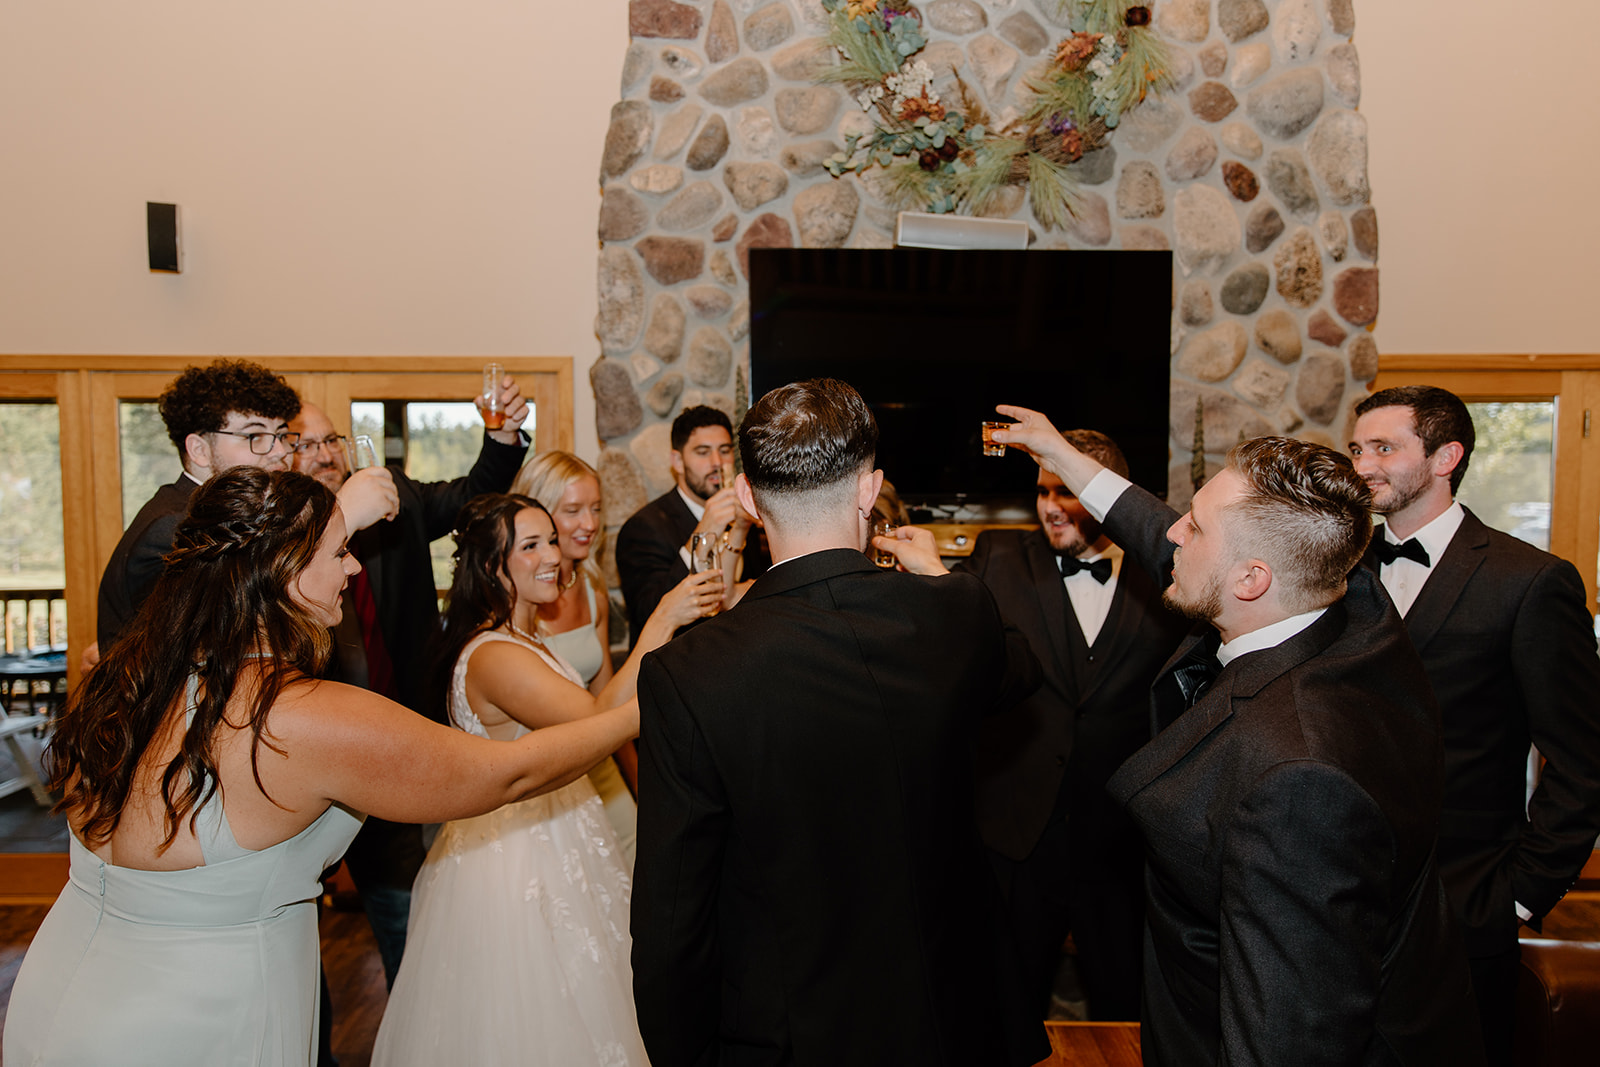 Wedding party cheers with a drink in hand